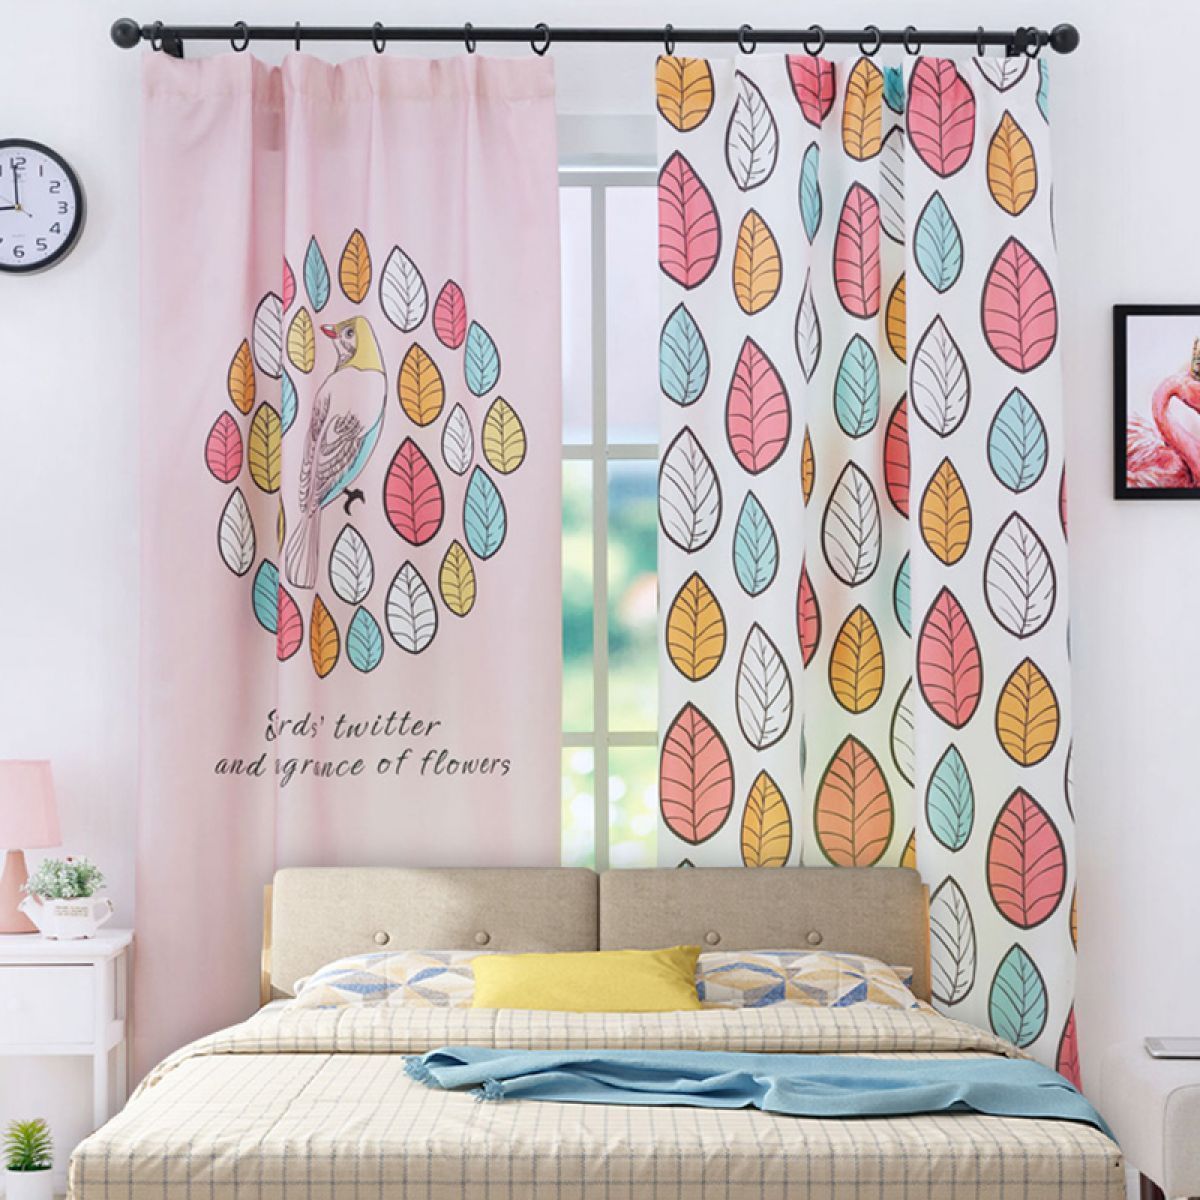 Colorful Leaf And Bird Printed Window Curtain Home Decor